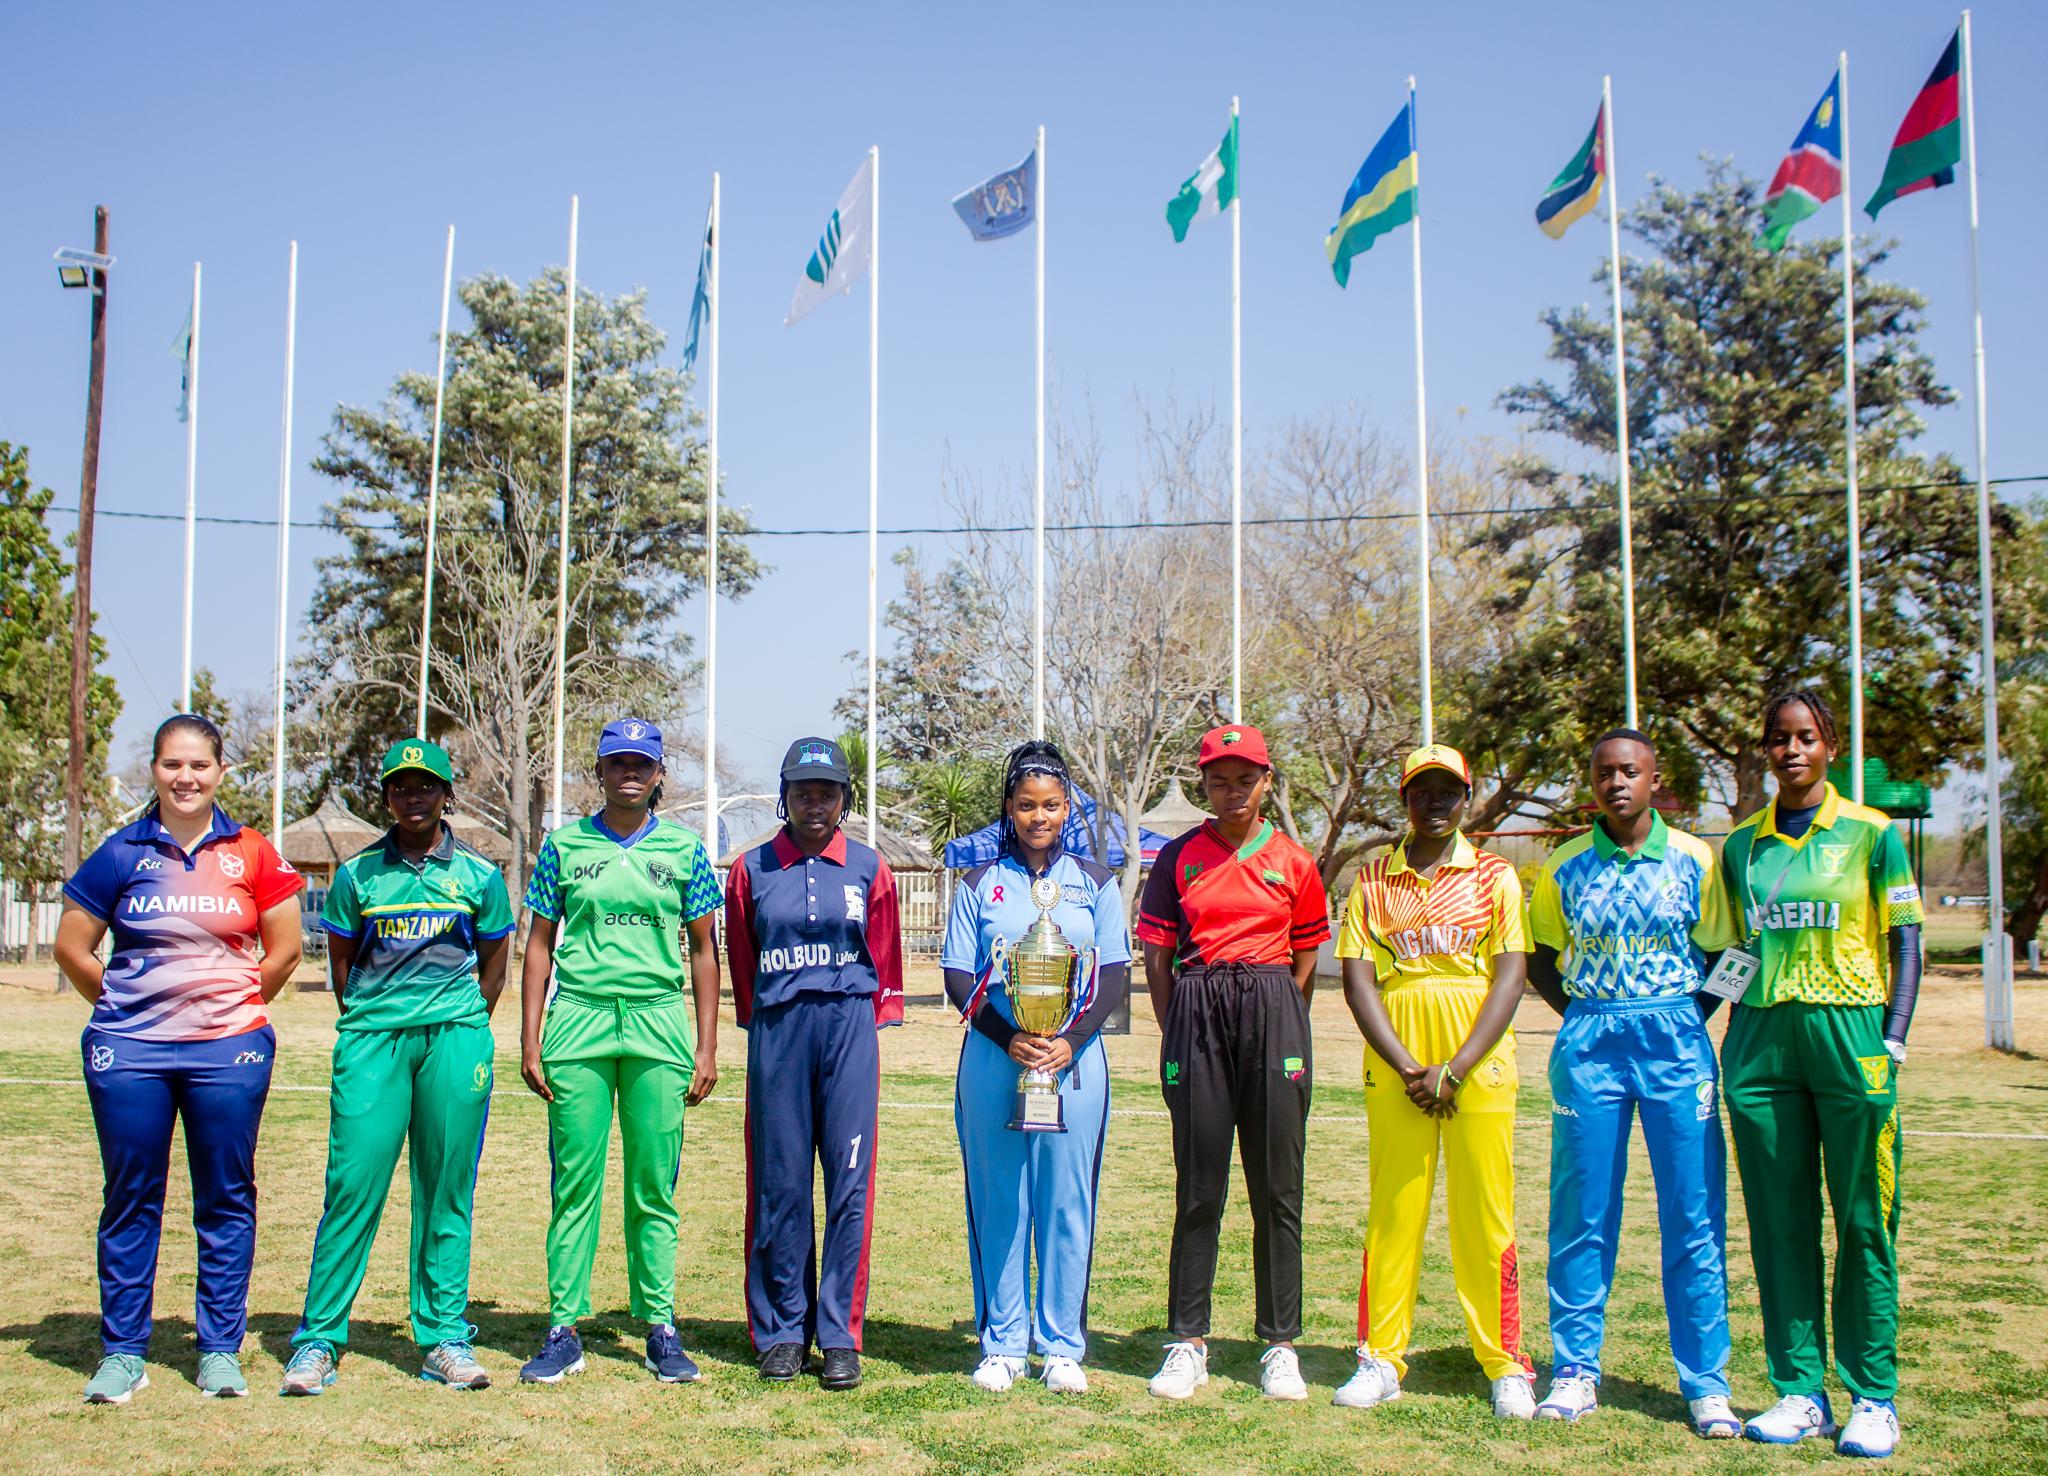 CSA: Africa’s starlets ready to fight for final spot at historic U-19 Women’s T20 World Cup